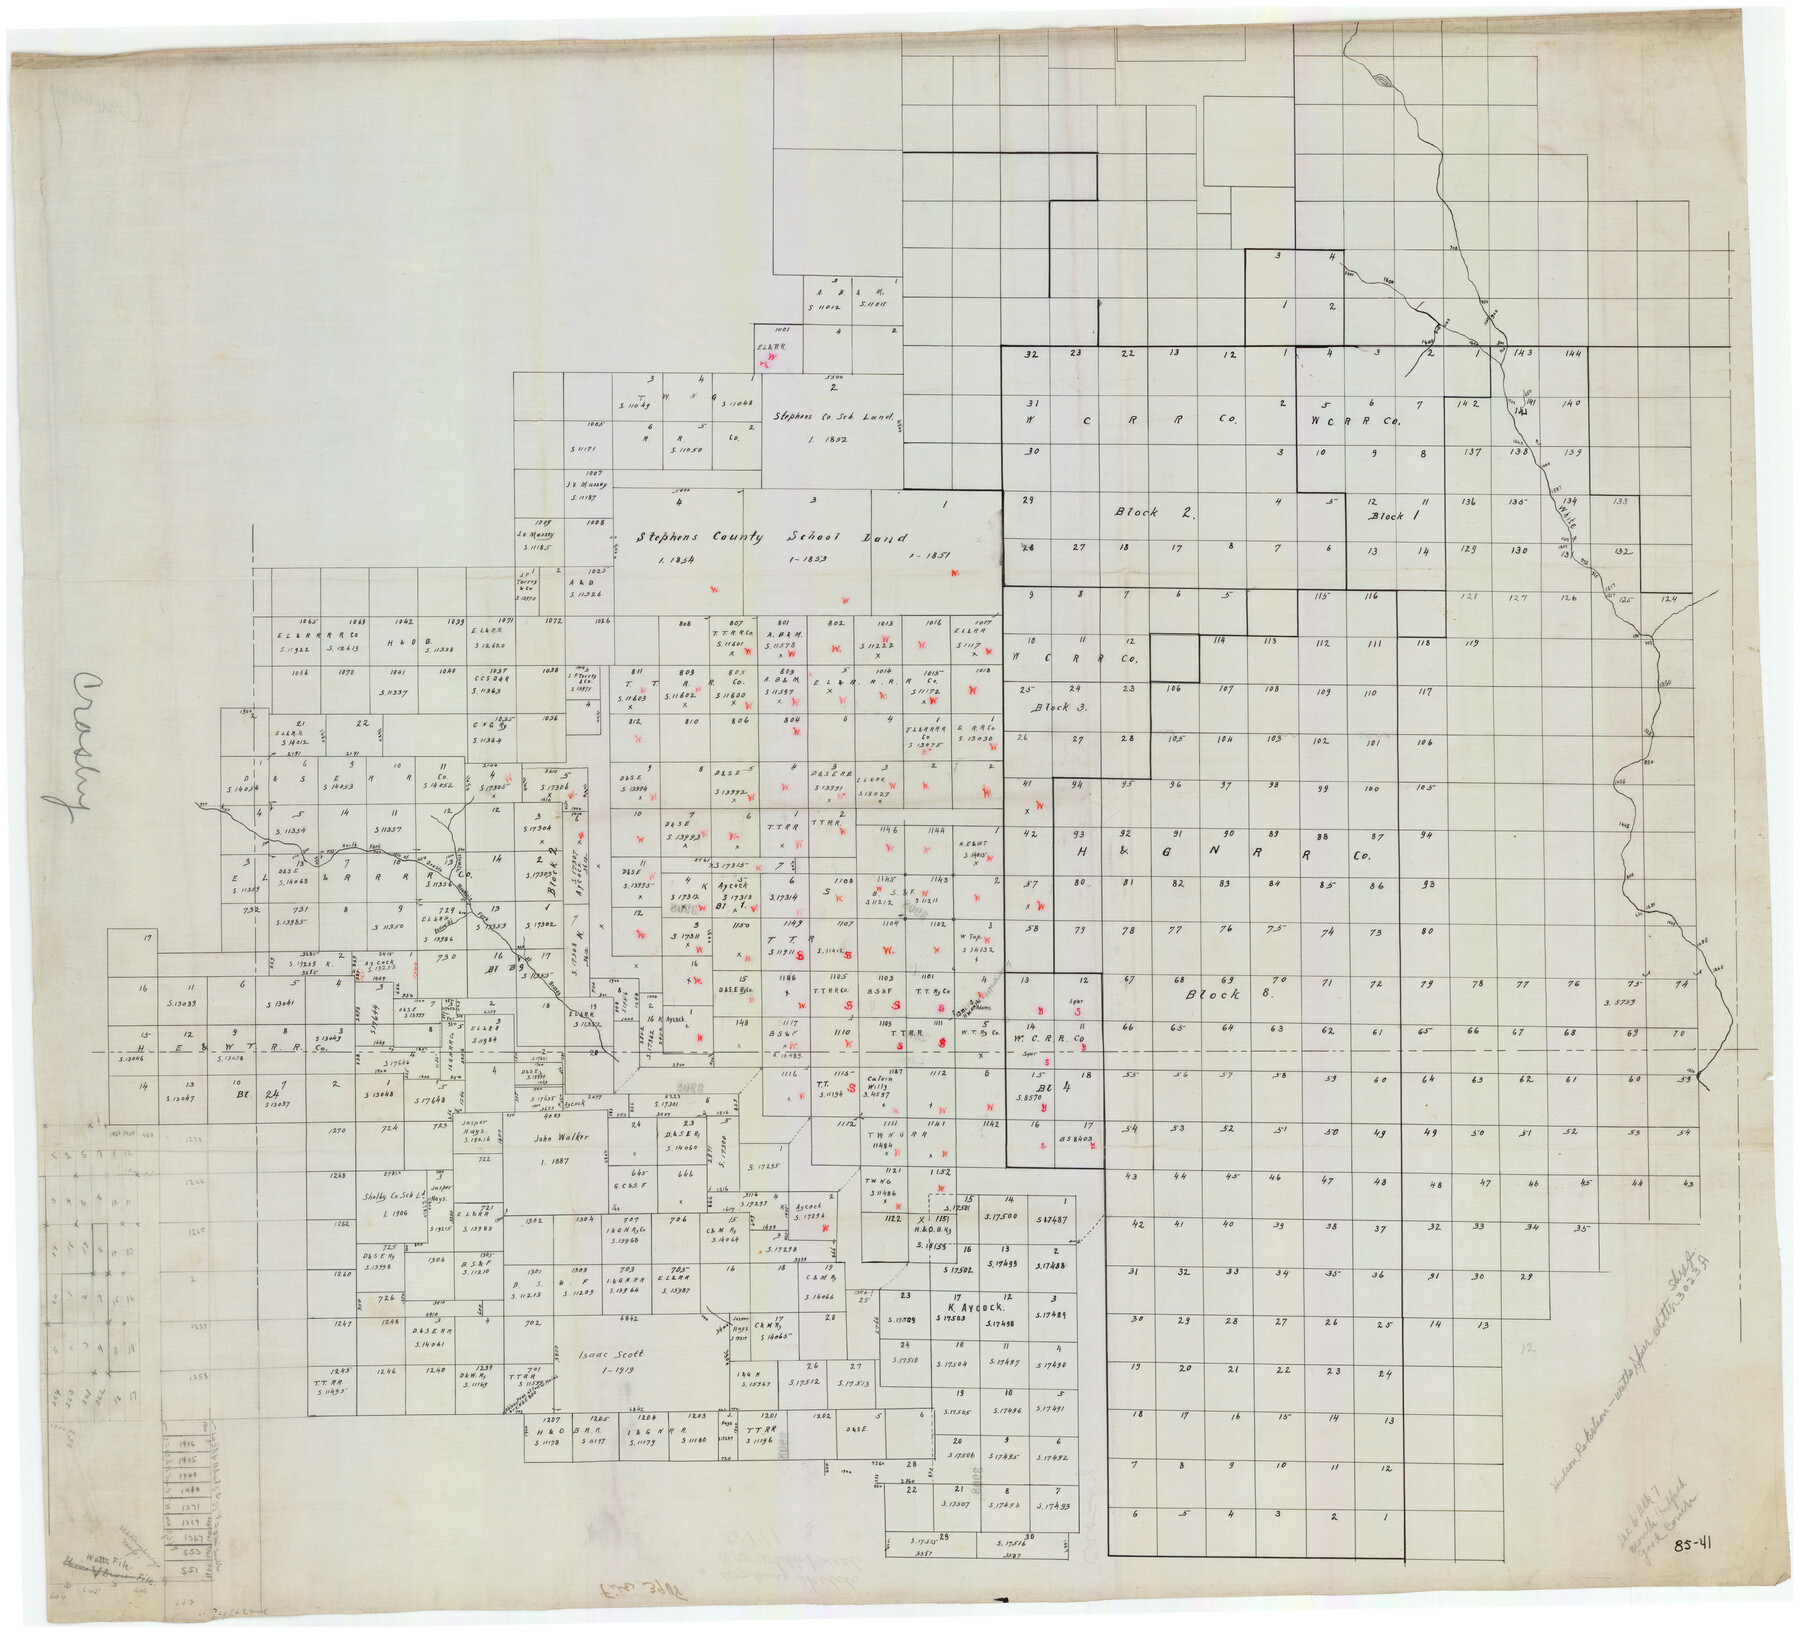 90908, [North 1/2 of Garza County, South 1/2 of Crosby County], Twichell Survey Records